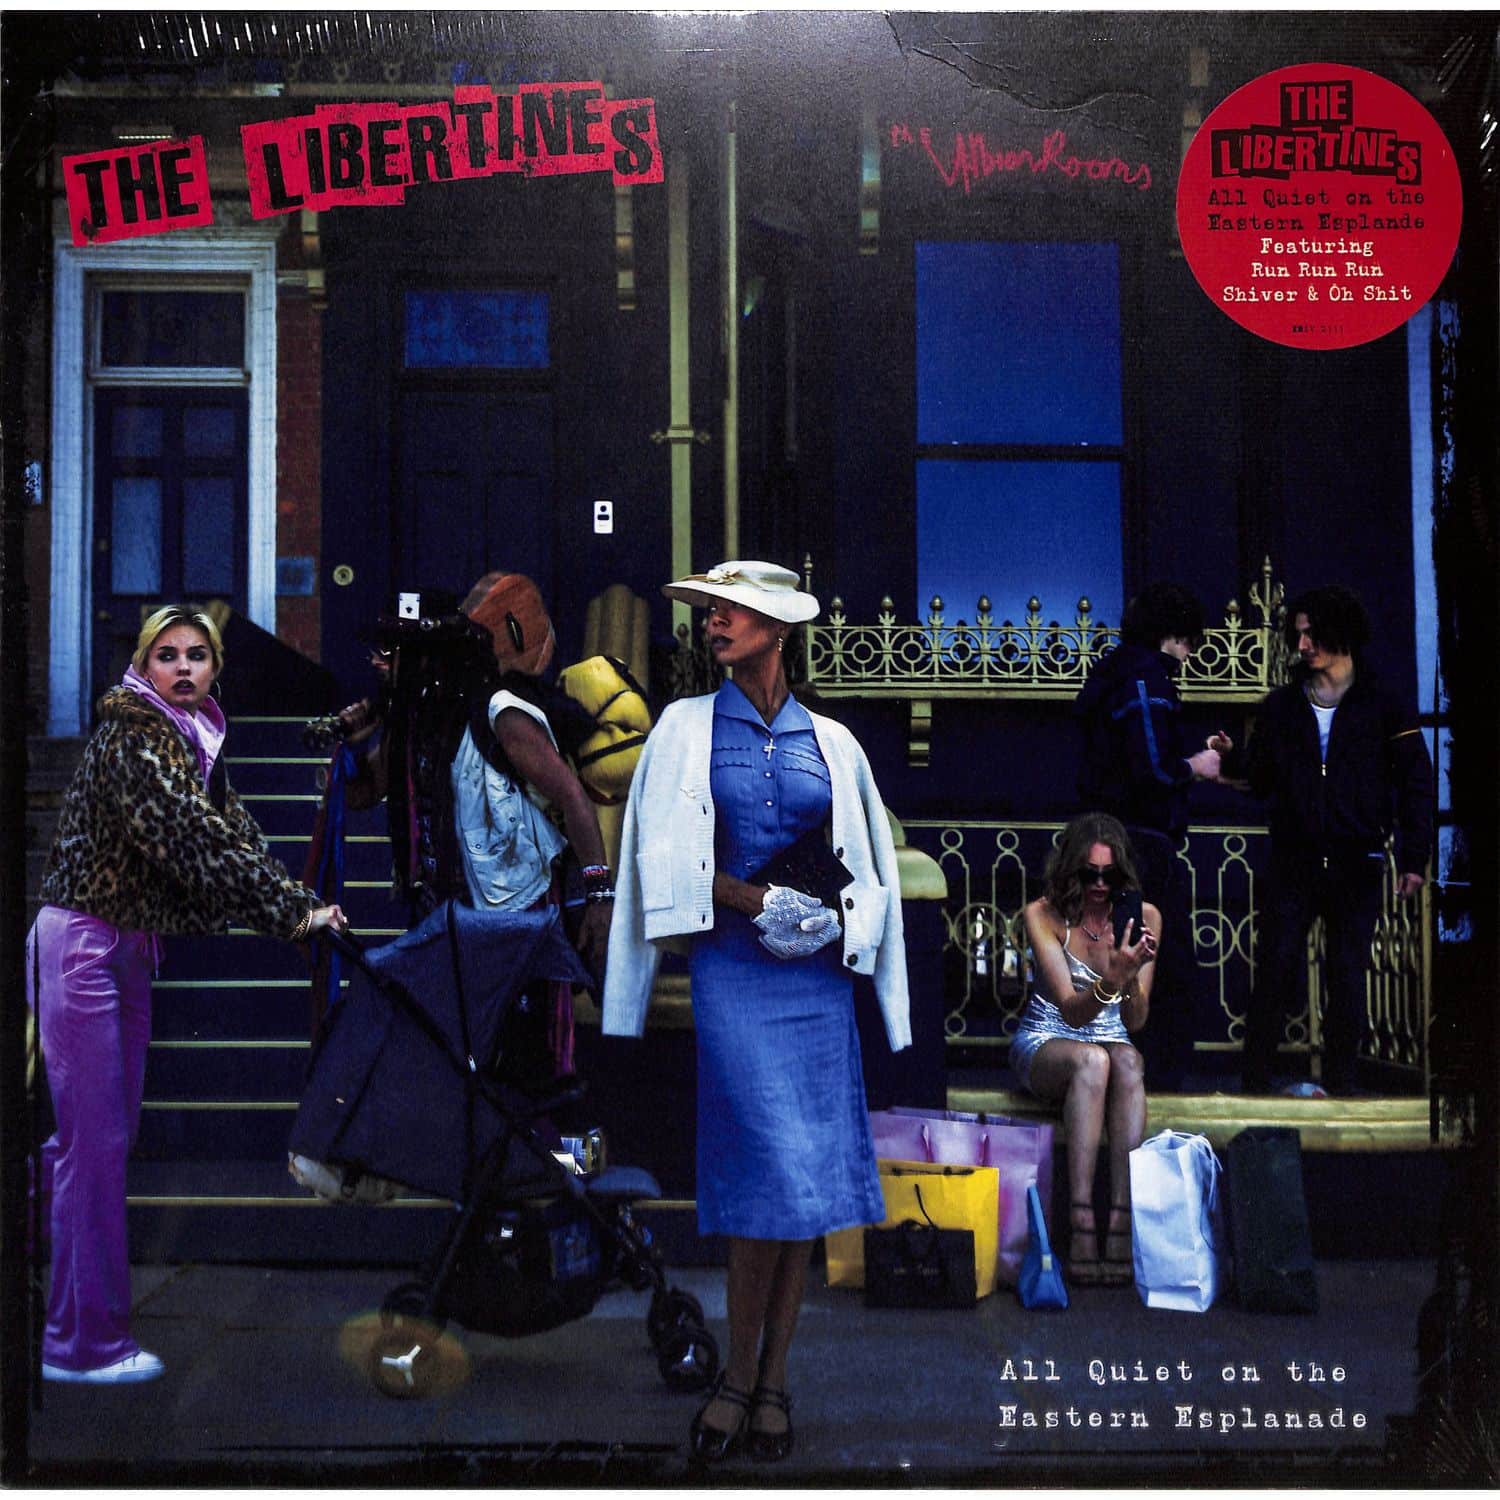 The Libertines - ALL QUIET ON THE EASTERN ESPLANADE 